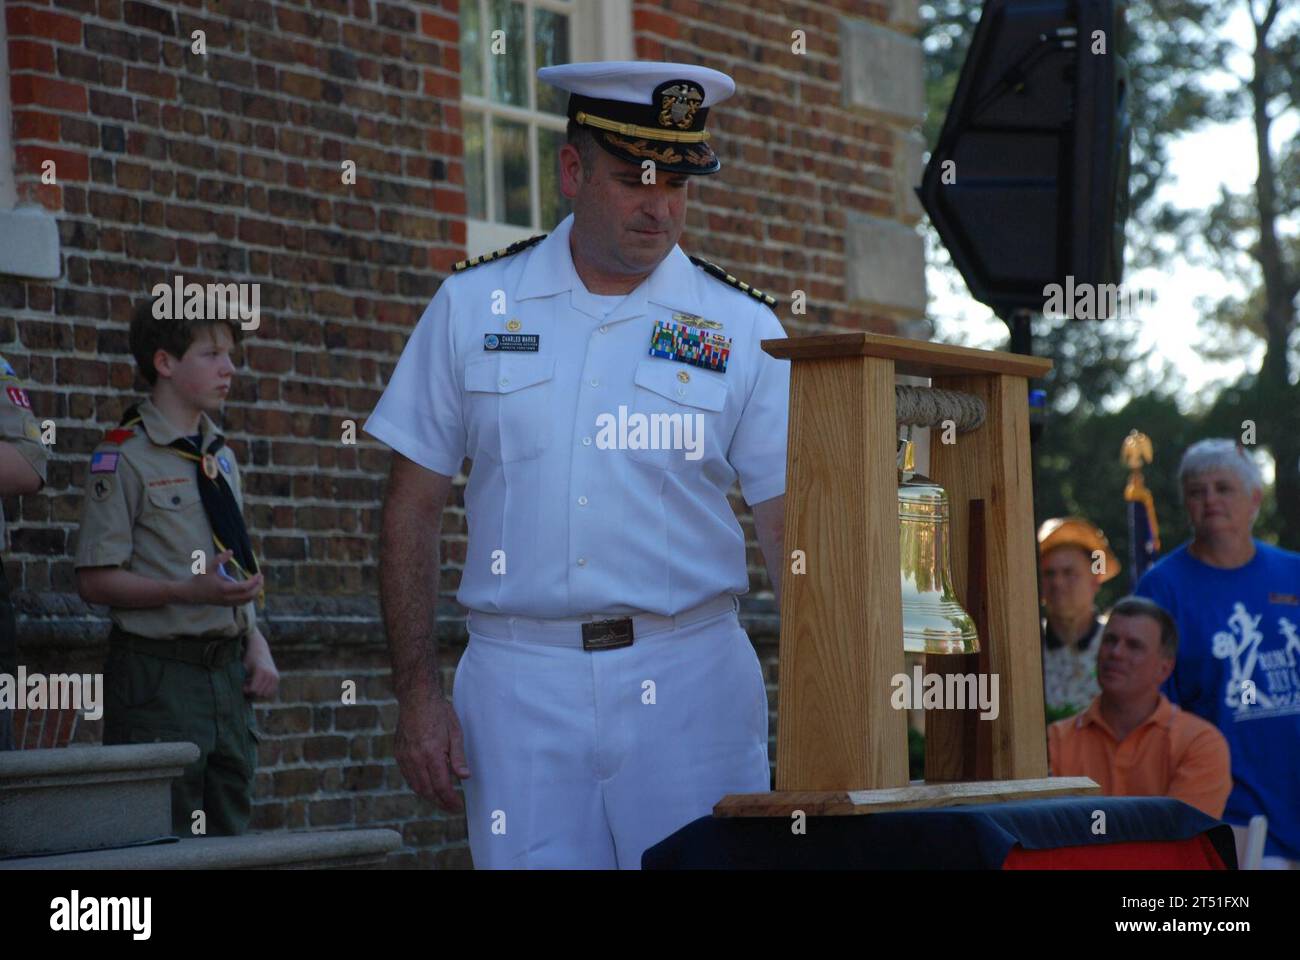 1007043312P-001  YORKTOWN, Va. (July 4, 2010) Capt. Chuck Marks, commanding officer of Naval Weapons Station Yorktown, rings a bell in honor of one of the original 13 colonies during a 4th of July ceremony at the home of Thomas Nelson. Nelson was a former governor of Virginia and one of the original signers of the Declaration of Independence. (U.S. Navy Stock Photo